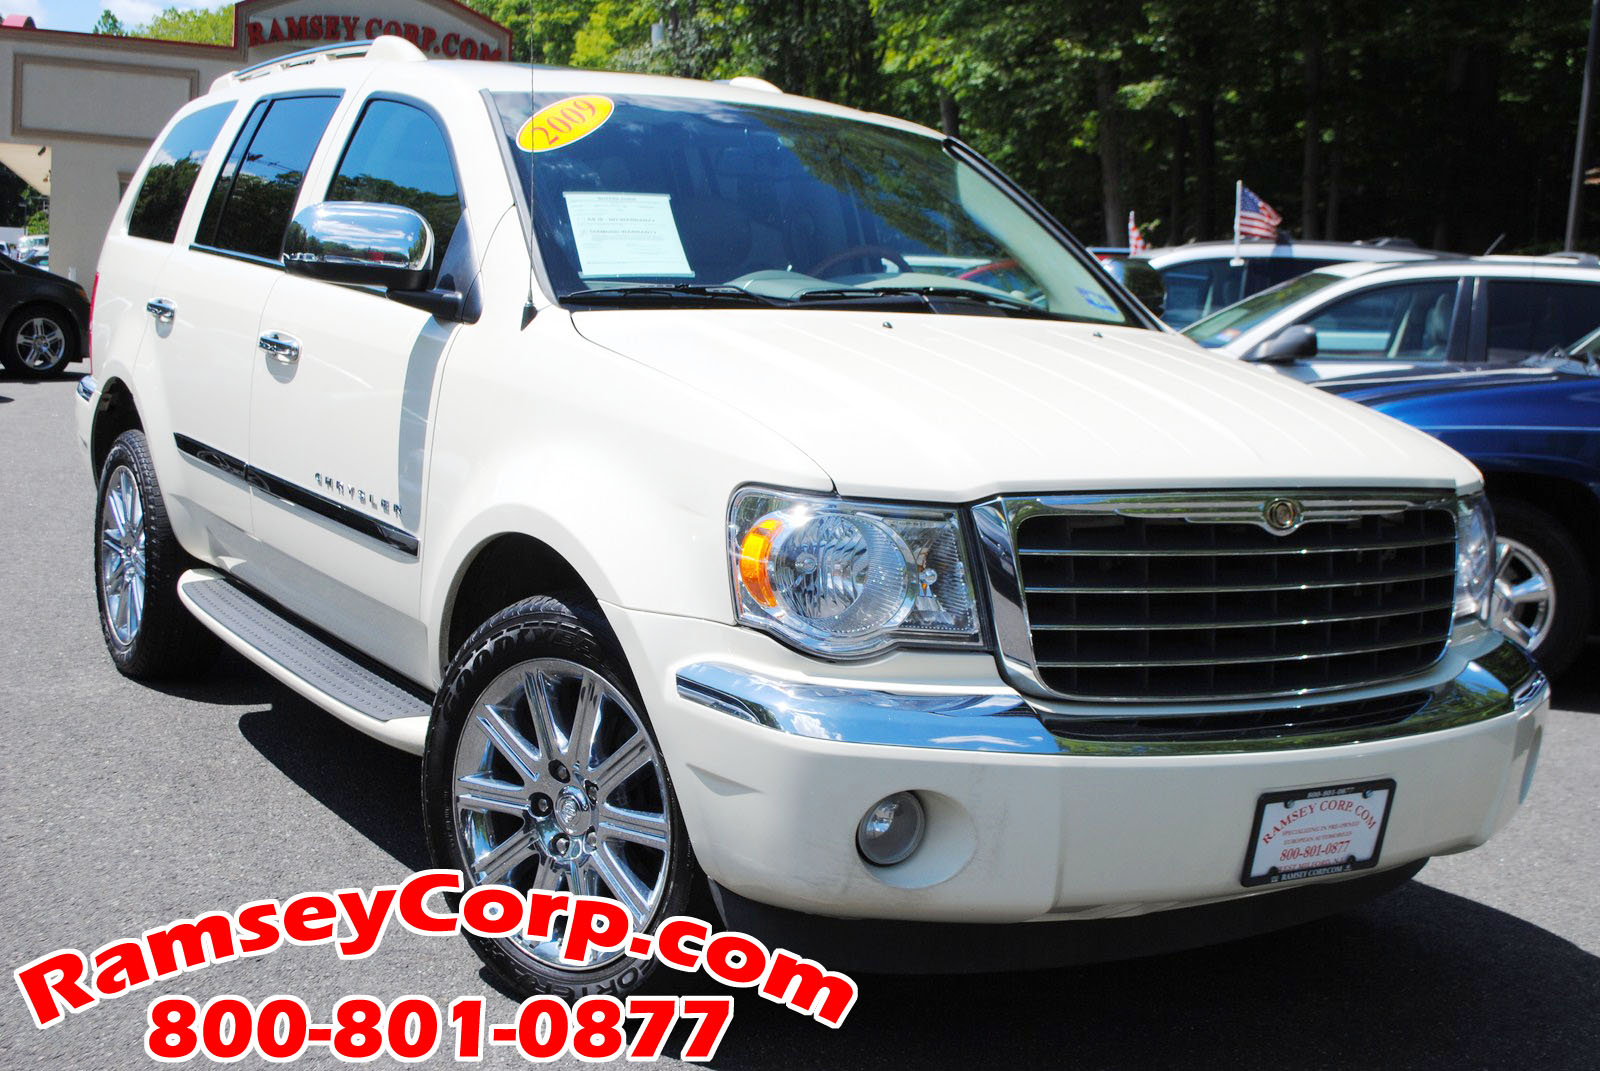 Used 2009 Chrysler Aspen For Sale at Ramsey Corp. | VIN: 1A8HW58T79F709492